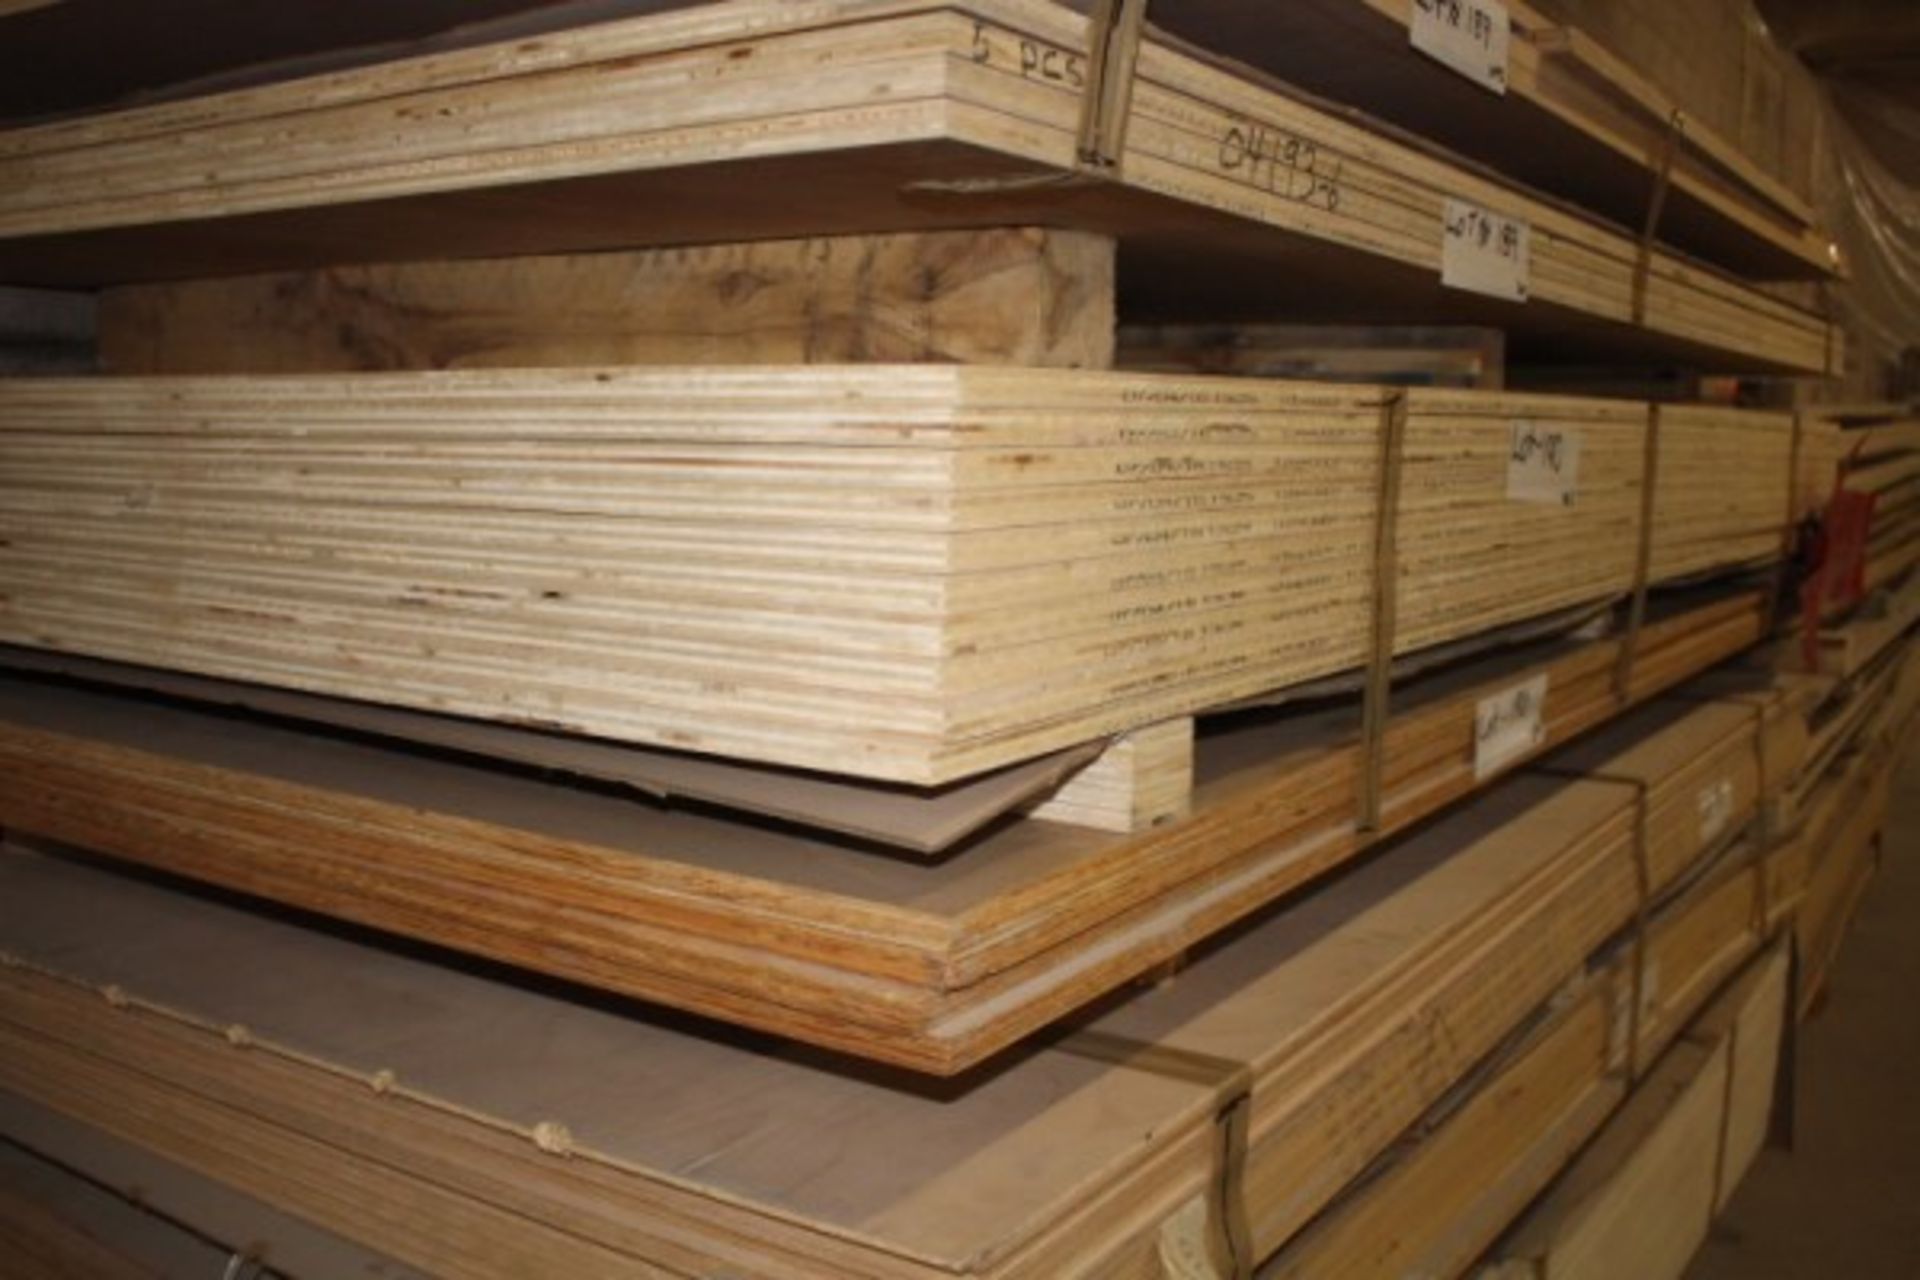 Lot of 4 x 8 sheets of plywood - Image 2 of 2